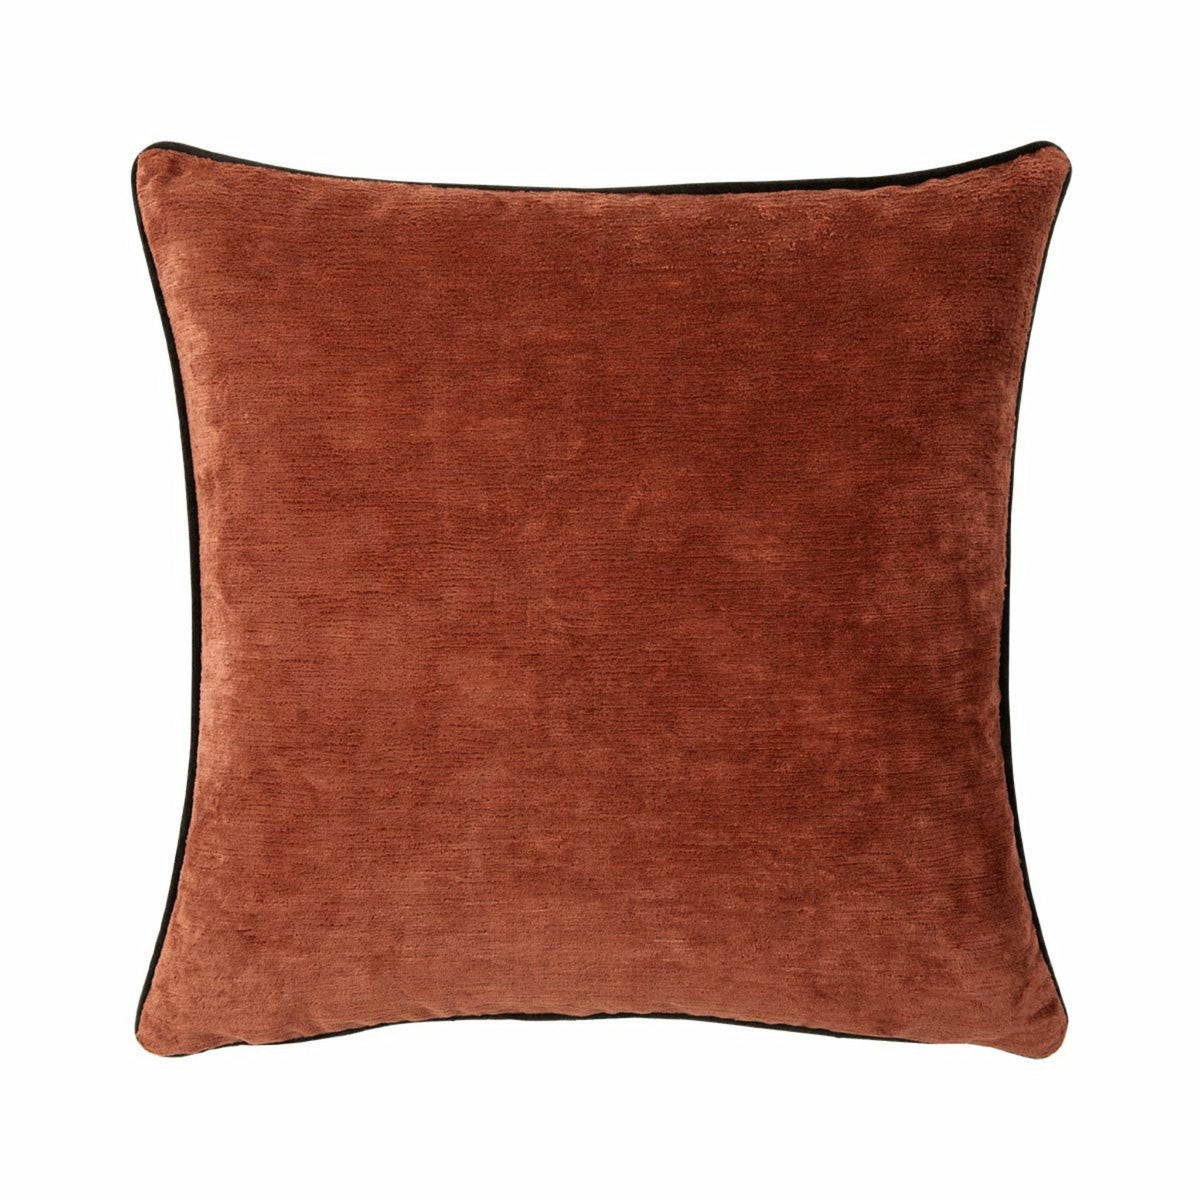 In Defense of Decorative Pillows